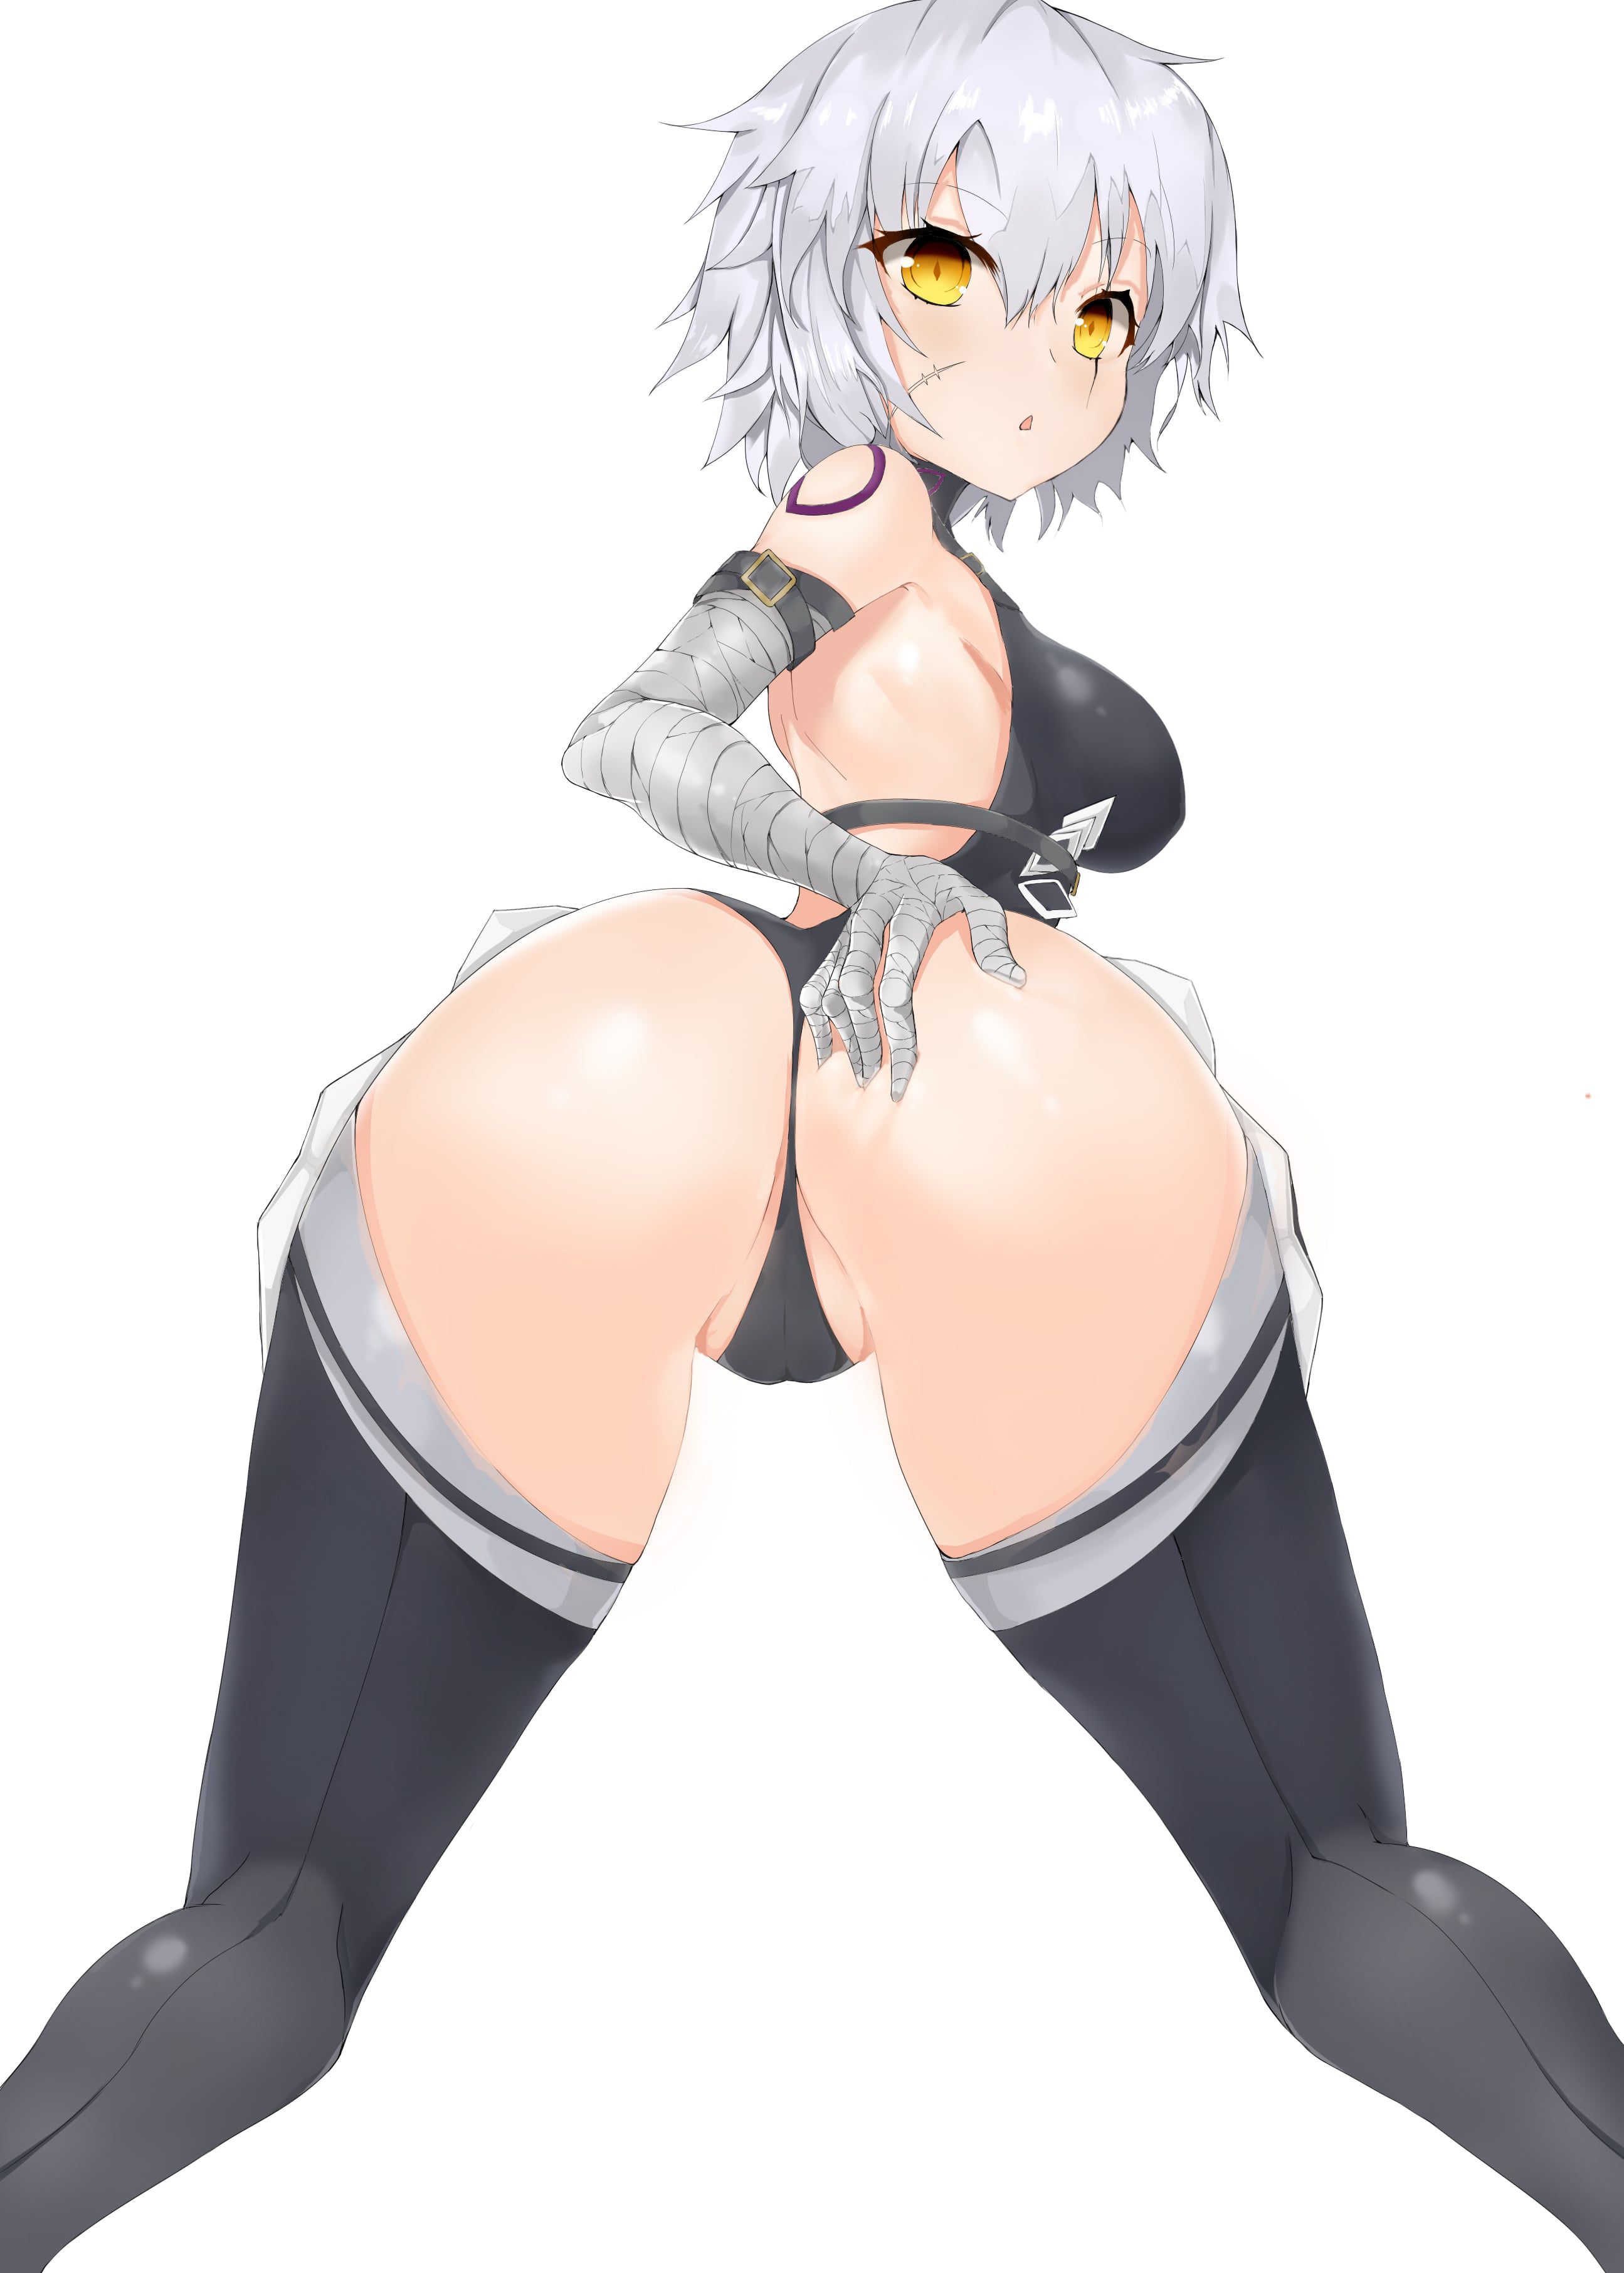 Cute MoE [FateGO] Jack the Ripper erotic images part 2 9